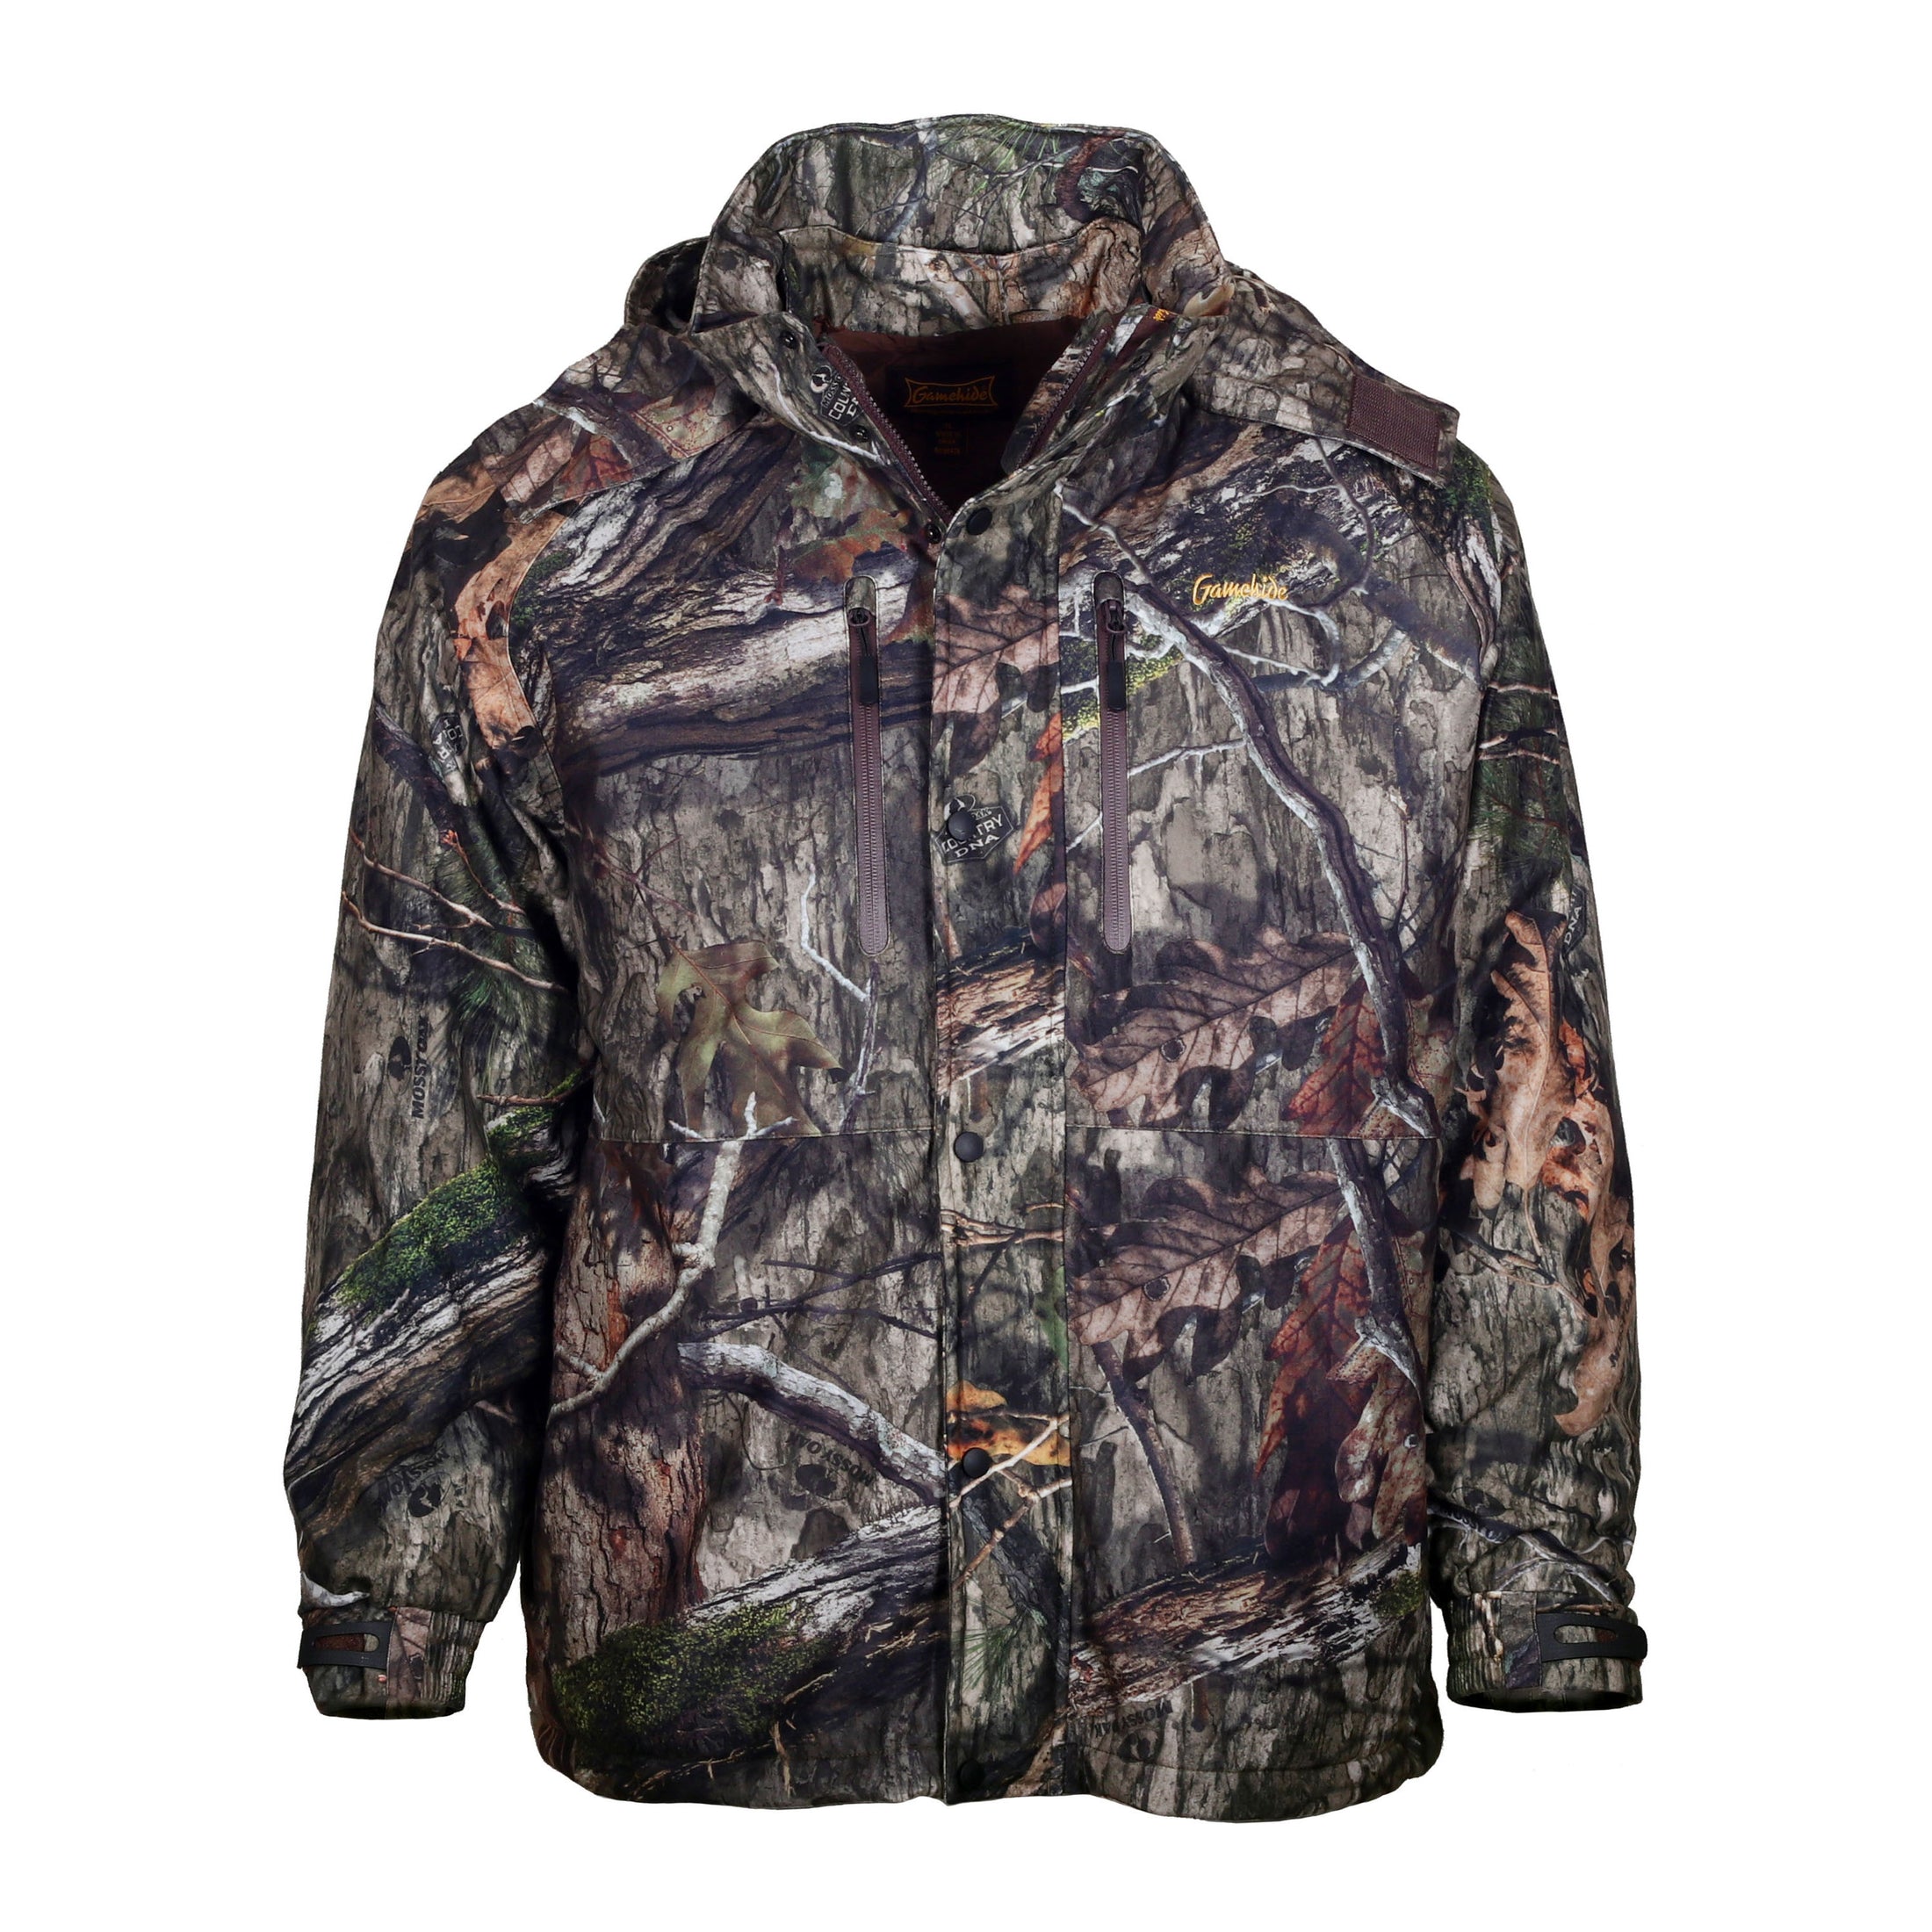 gamehide wild systems parka front view (mossy oak dna)